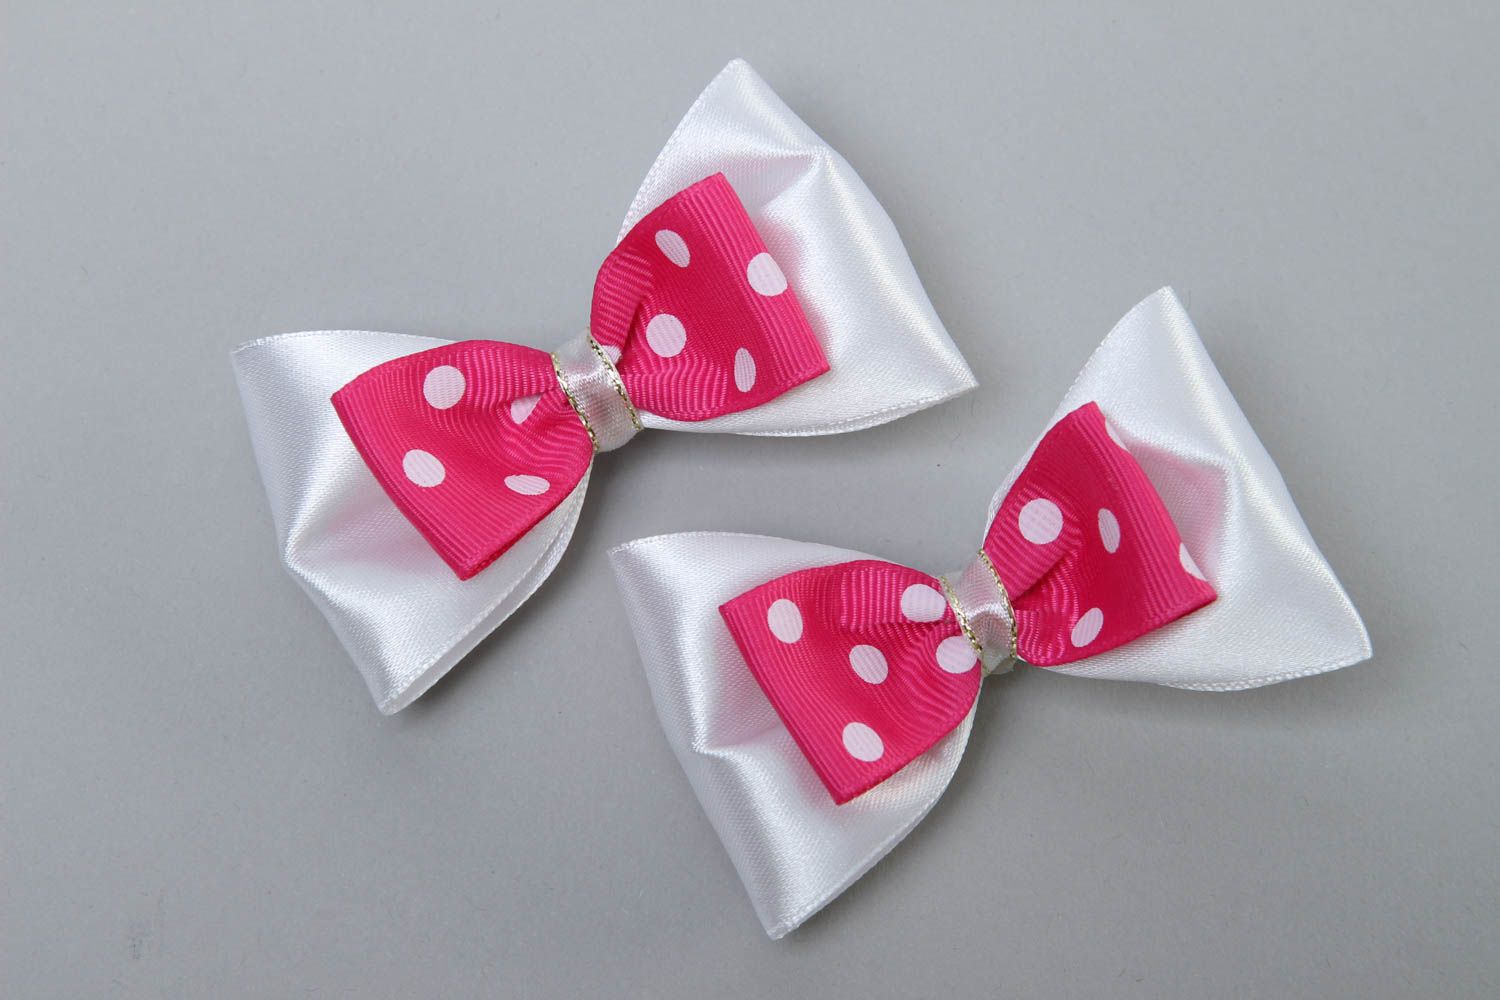 Gentle childrens hair bow handmade bow hair clip 2 pieces gifts for her photo 2